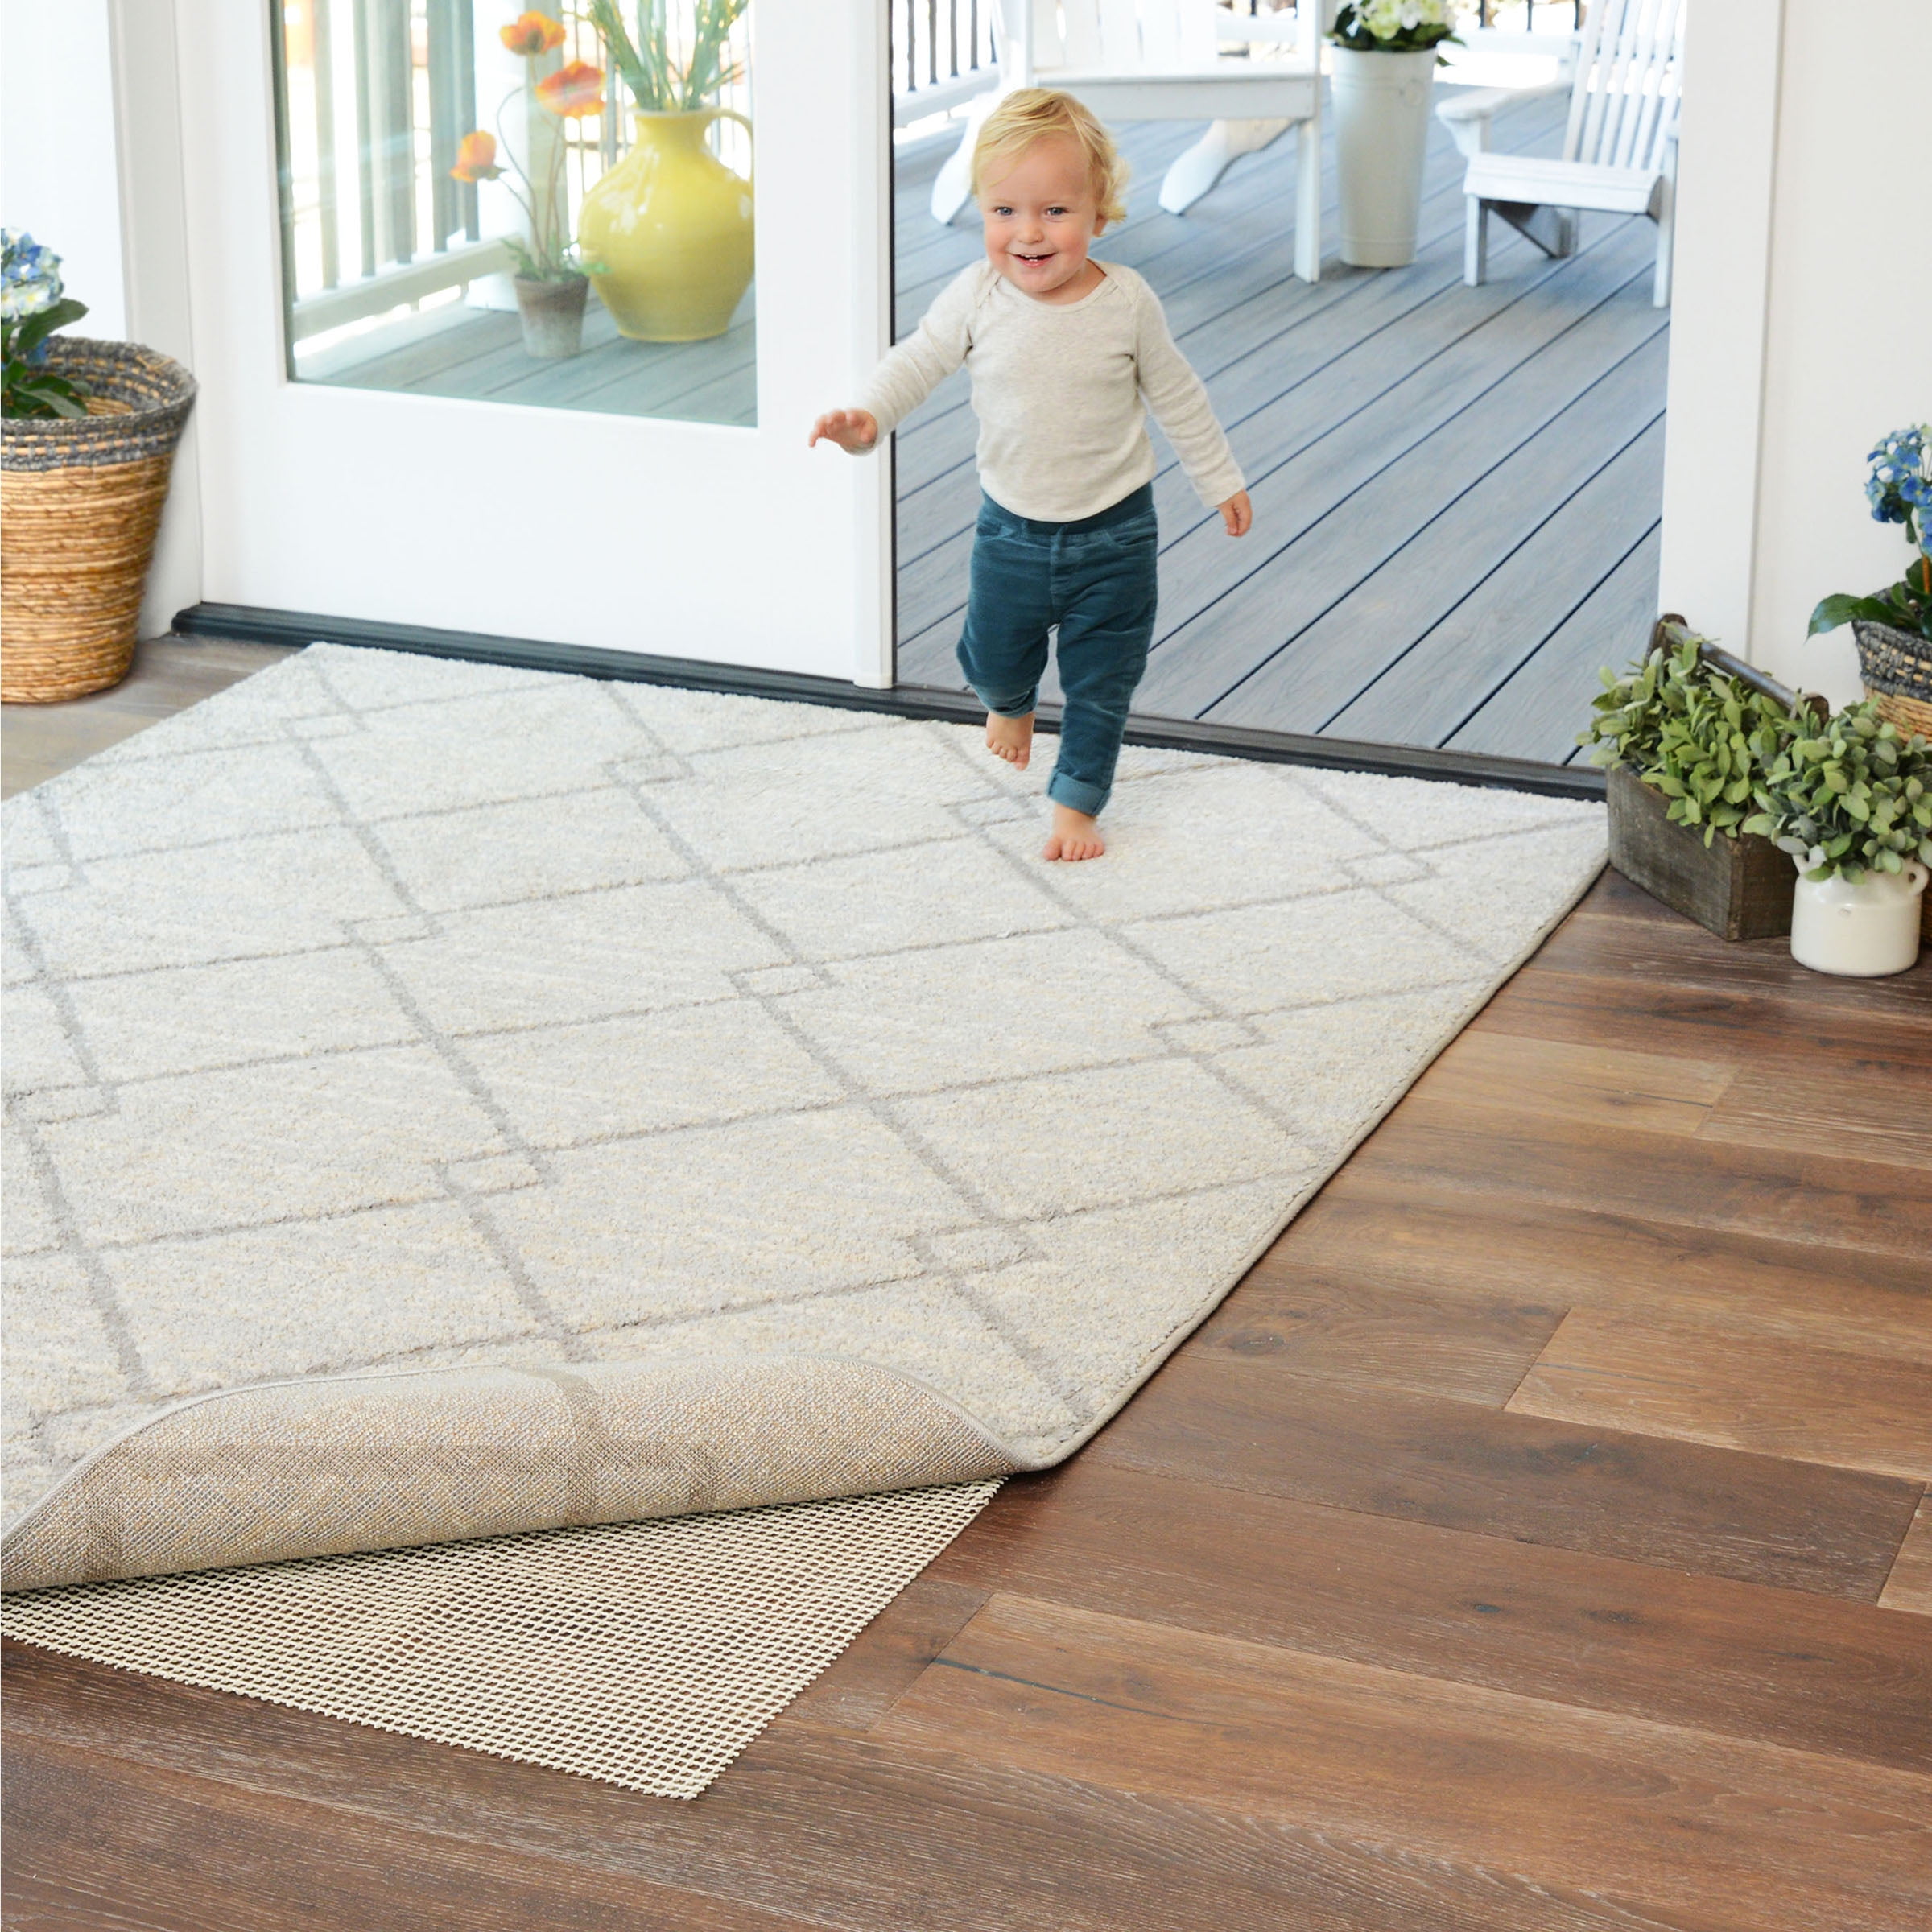 FestiCorp Non Slip Rug Pads 4x6 Ft Non Skid Rug Pad Gripper, Anti-Slip  Carpet Rug Mats for Under Rugs and Hard Surface Floors